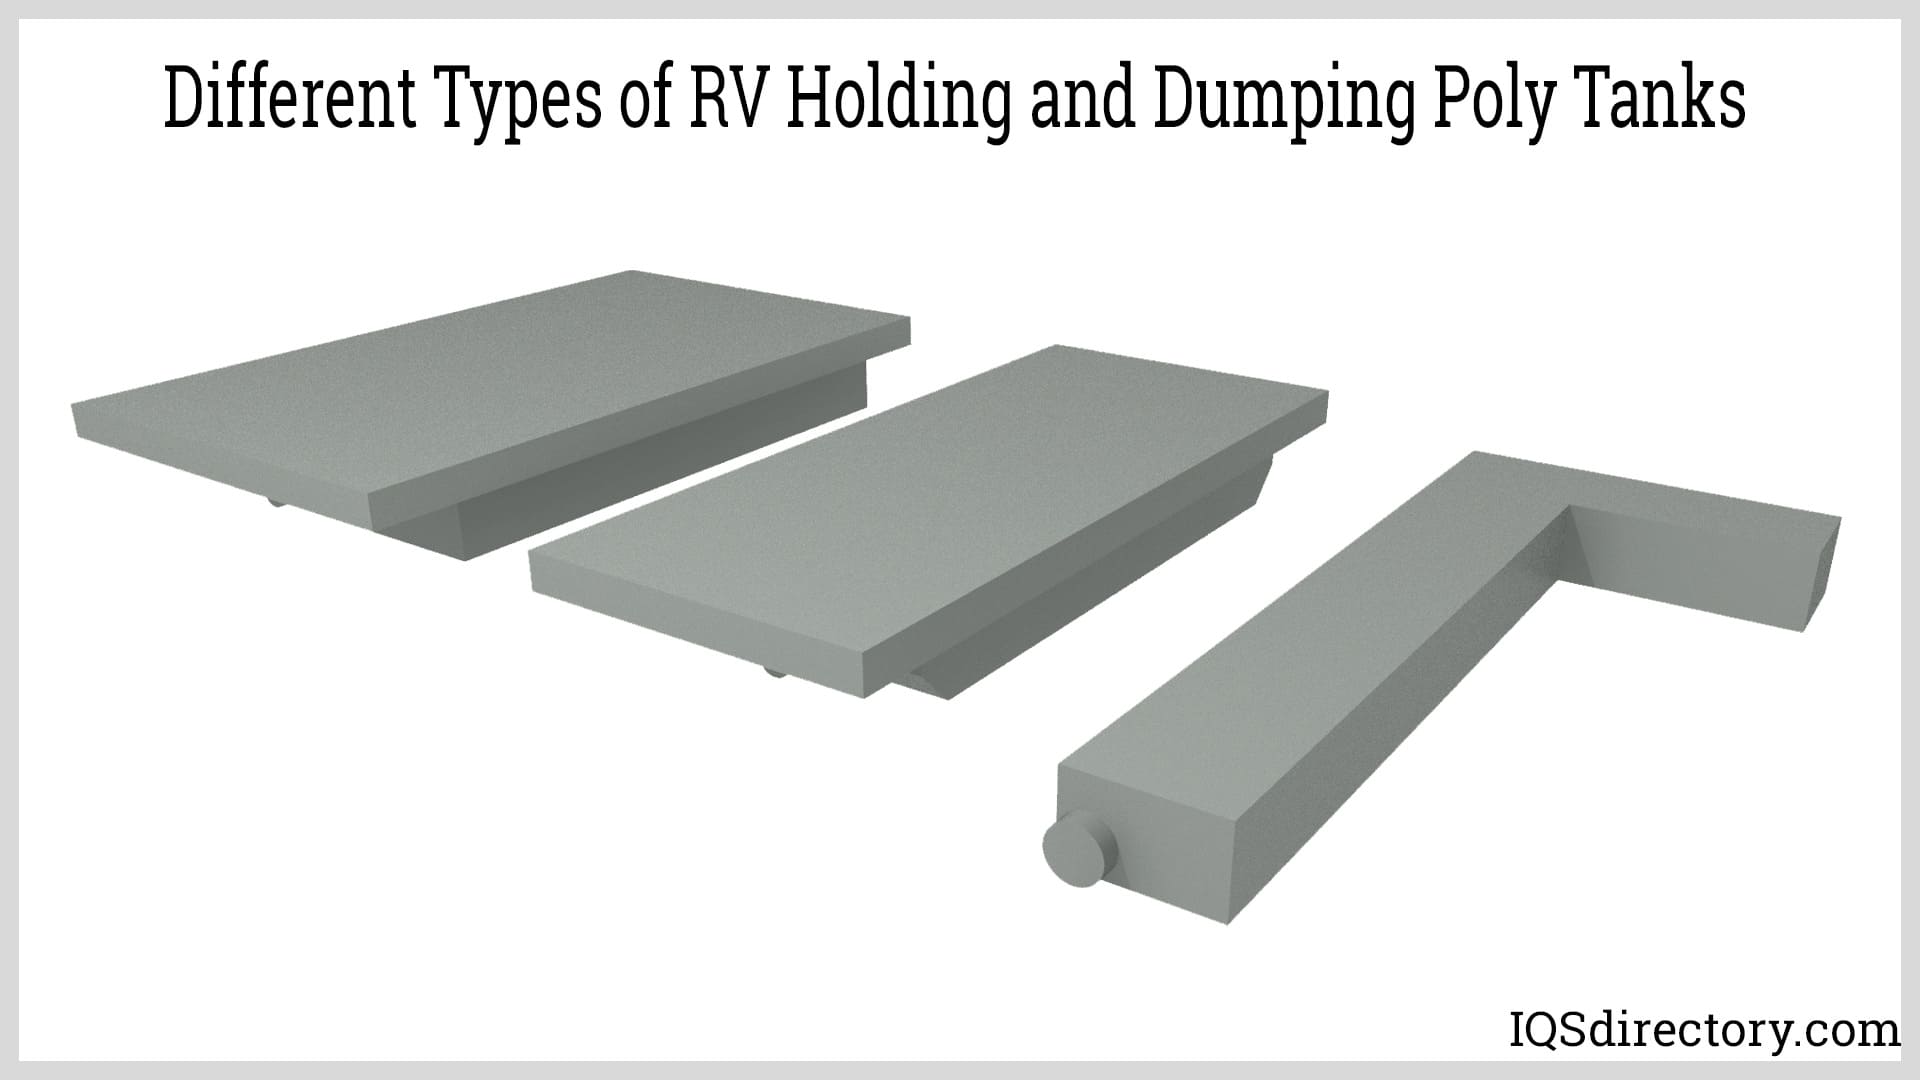 Different Types of RV Holding and Dumping Poly Tanks